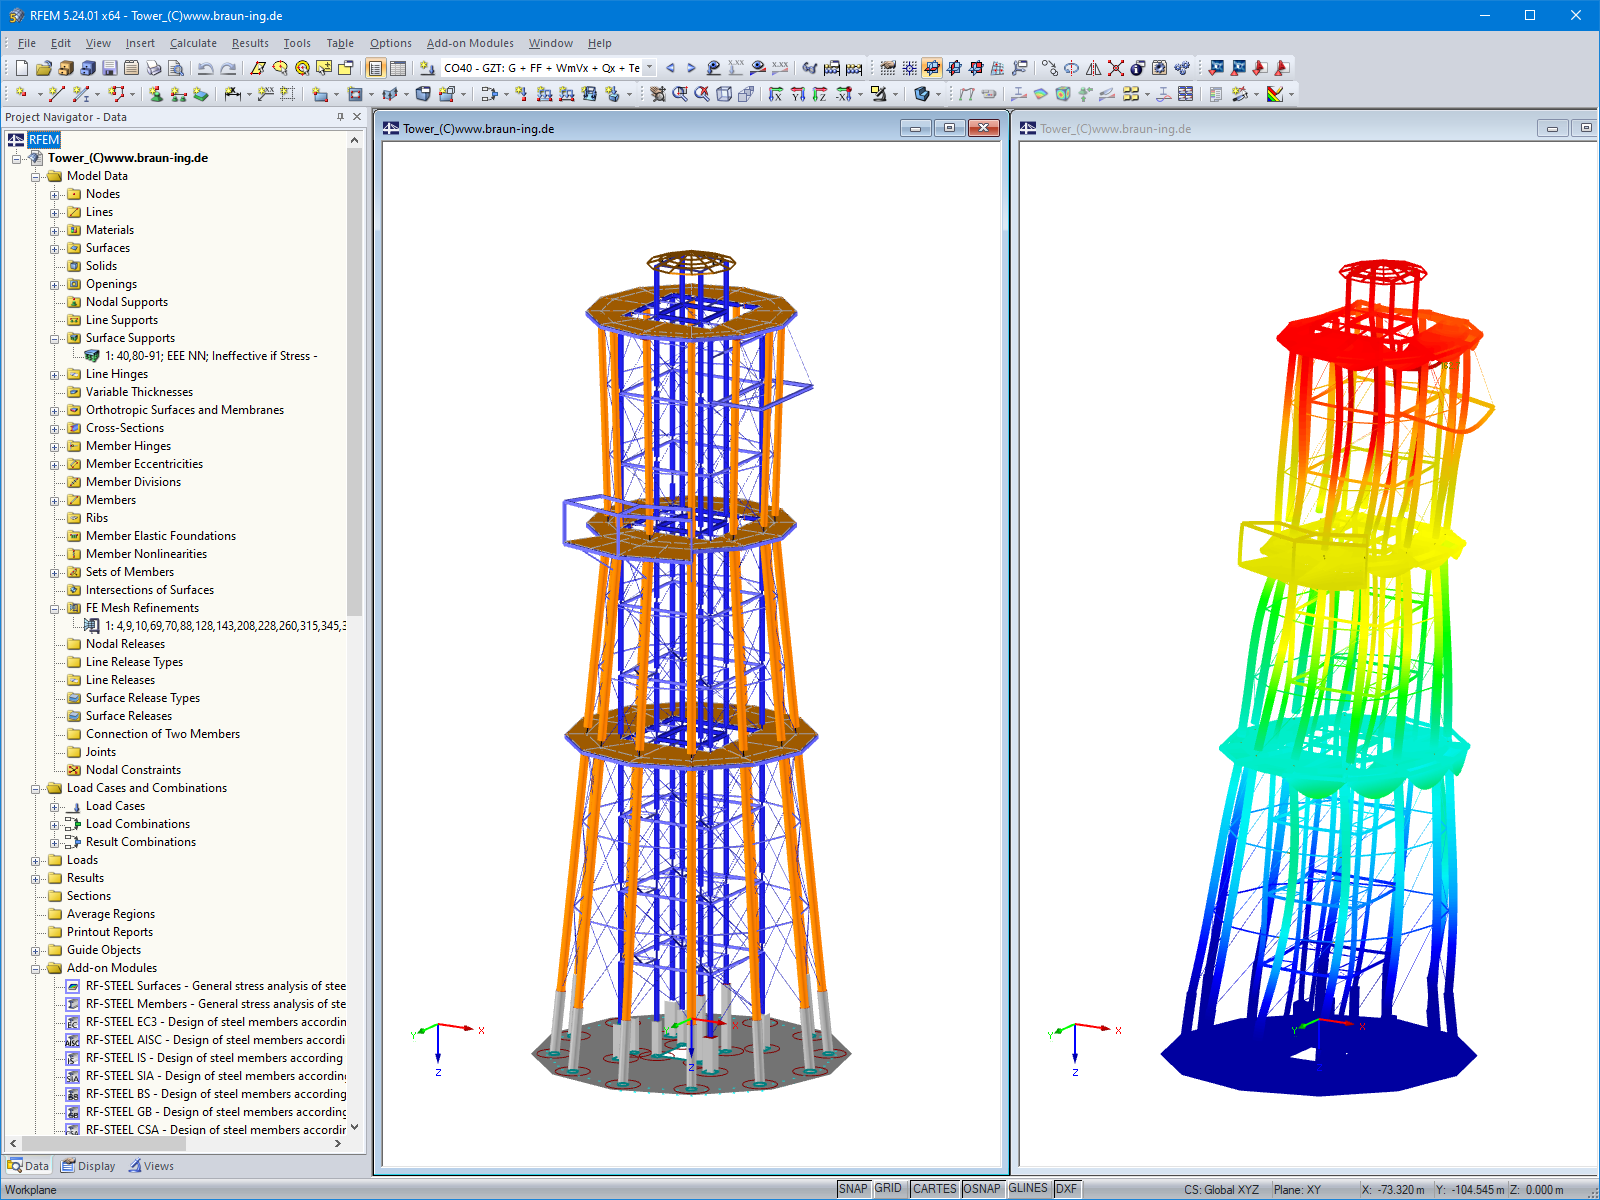 Lookout Tower Model (Left) and Deformation Image (Right) in RFEM (© Ingenieurbüro Braun GmbH & Co. KG)